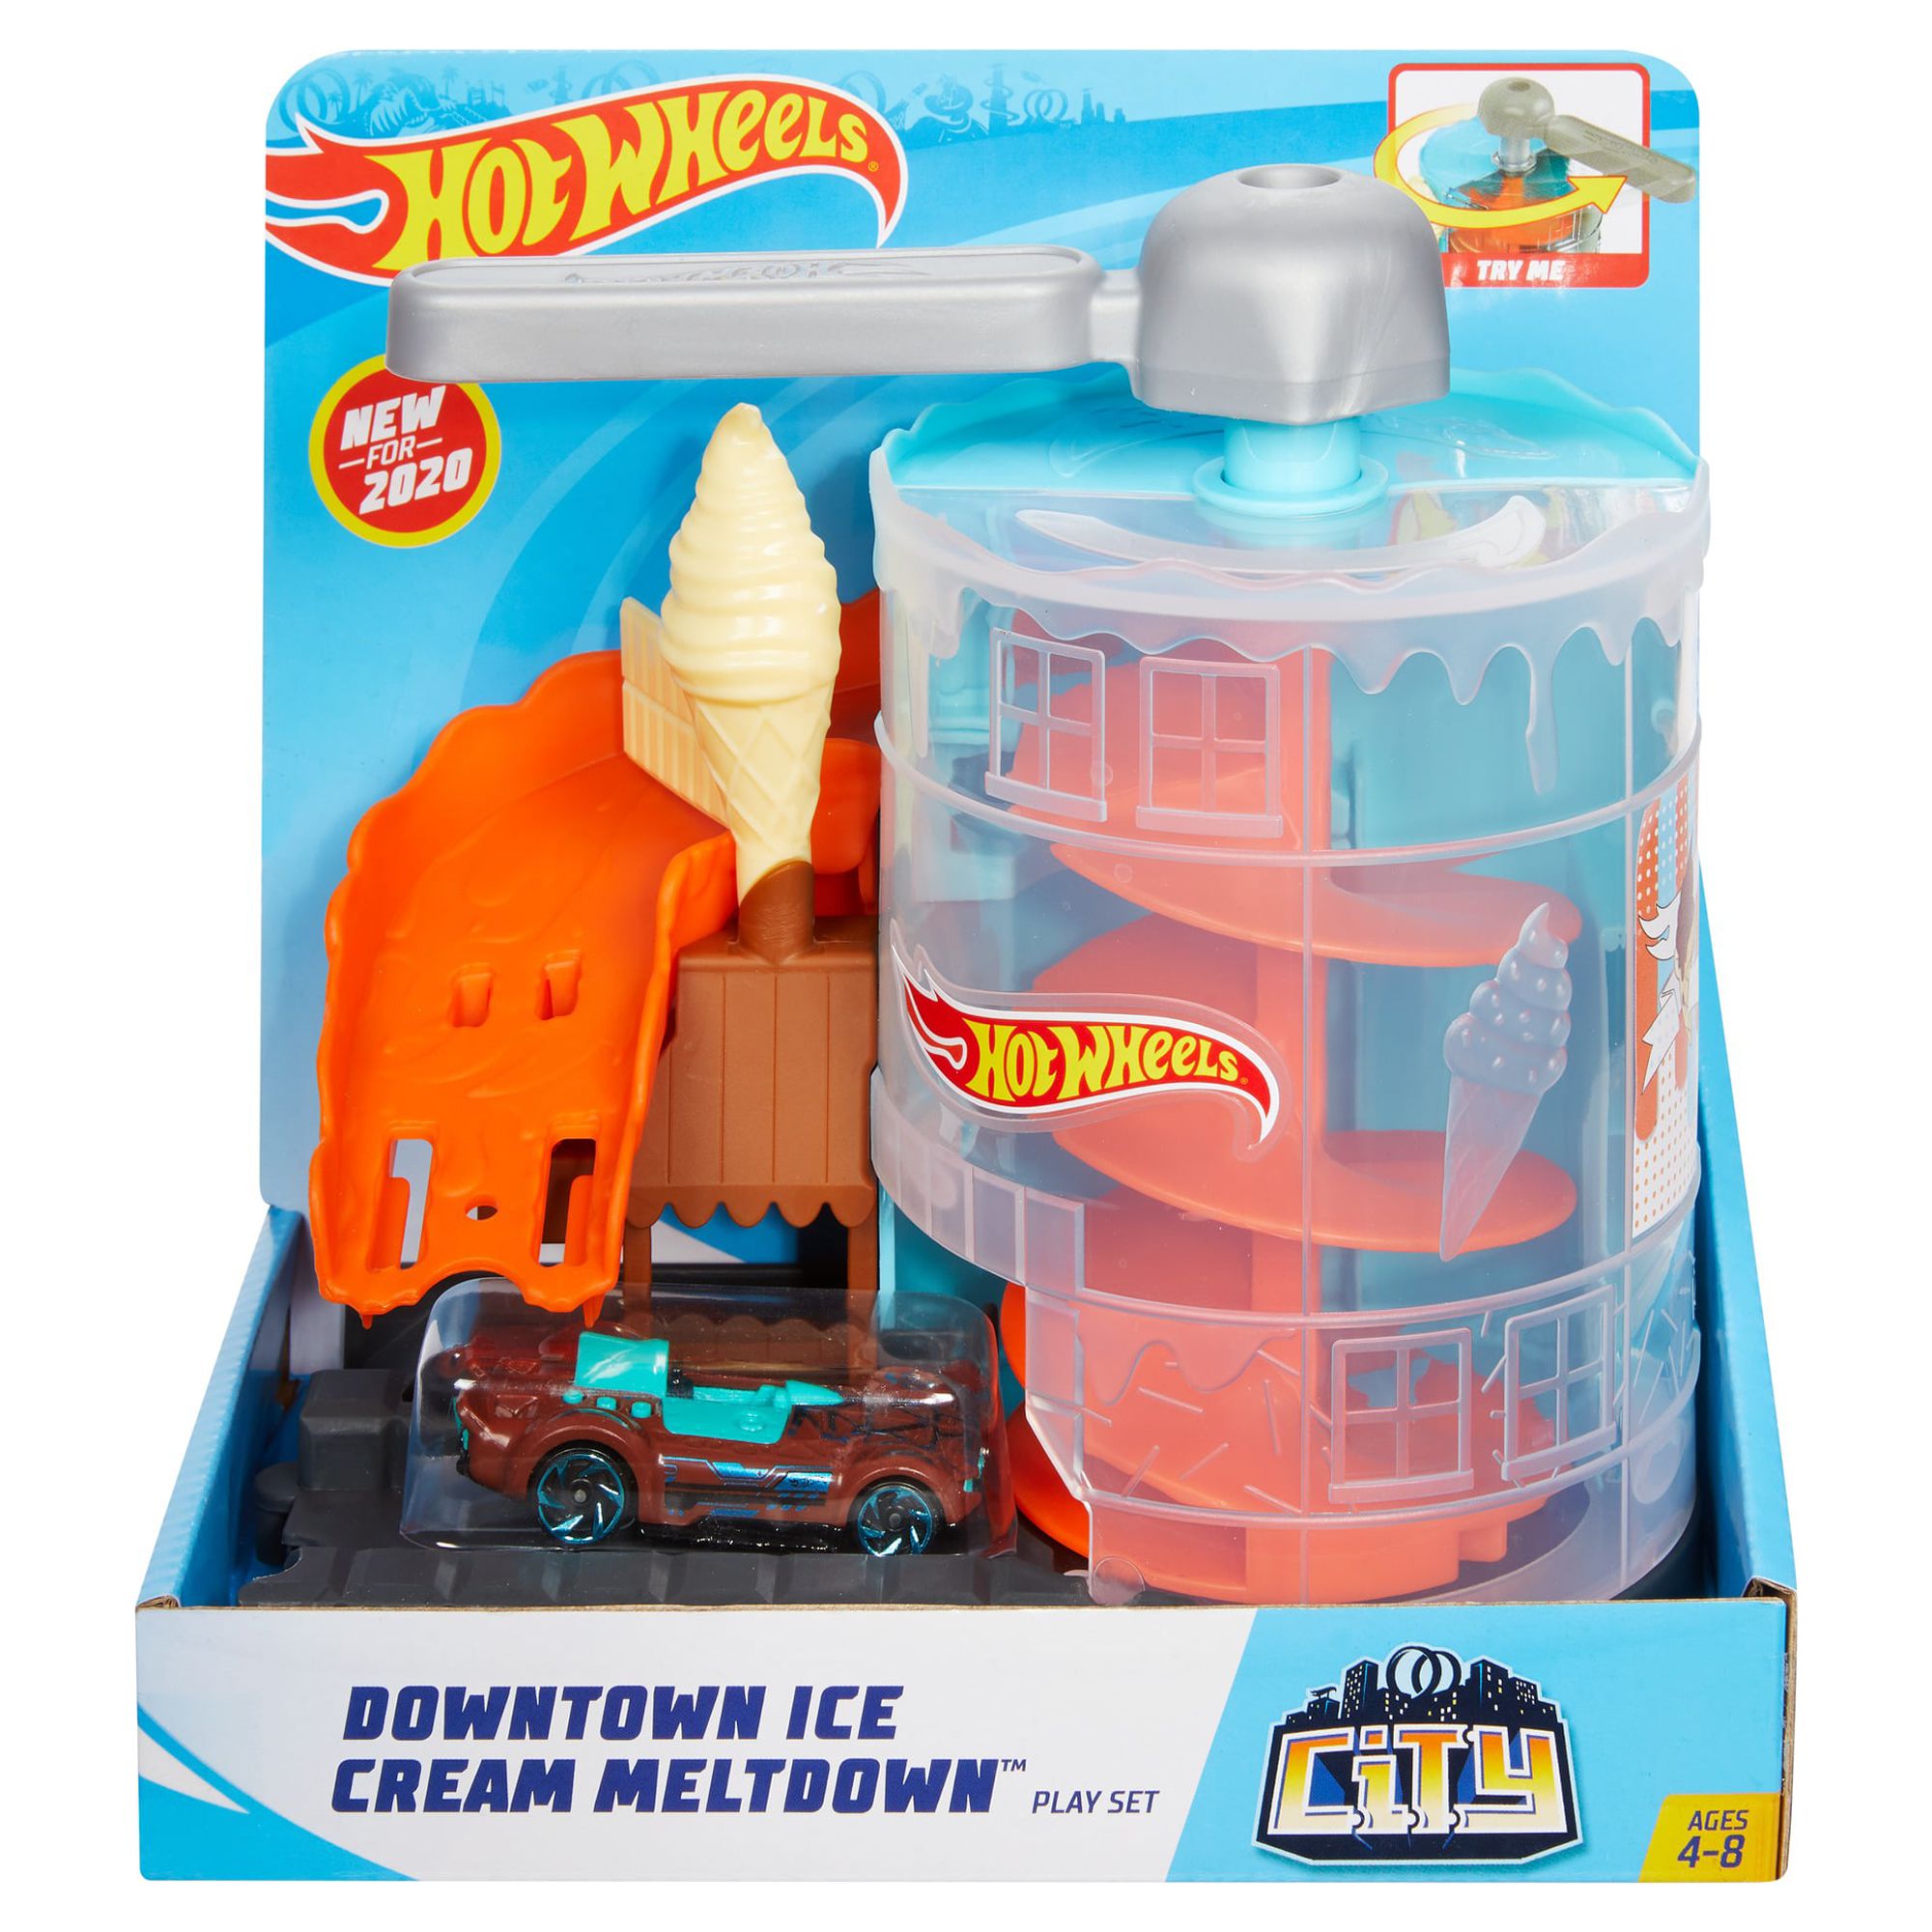 Hot Wheels Downtown Ice Cream Meltdown Playset - image 5 of 5